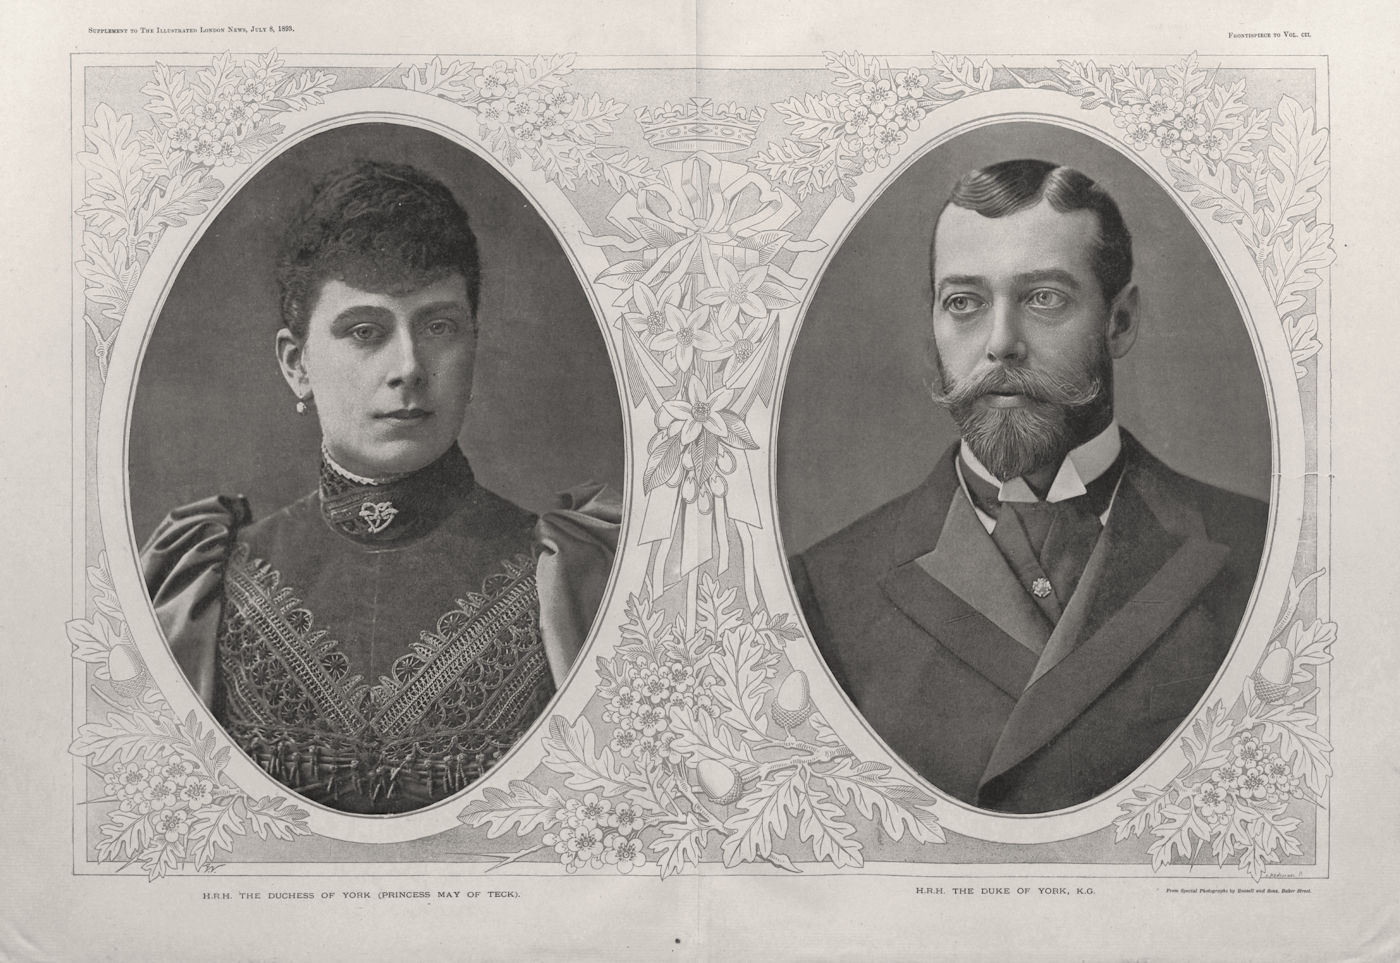 The Duke & Duchess of York (Princess Mary of Teck). Later King George V 1893